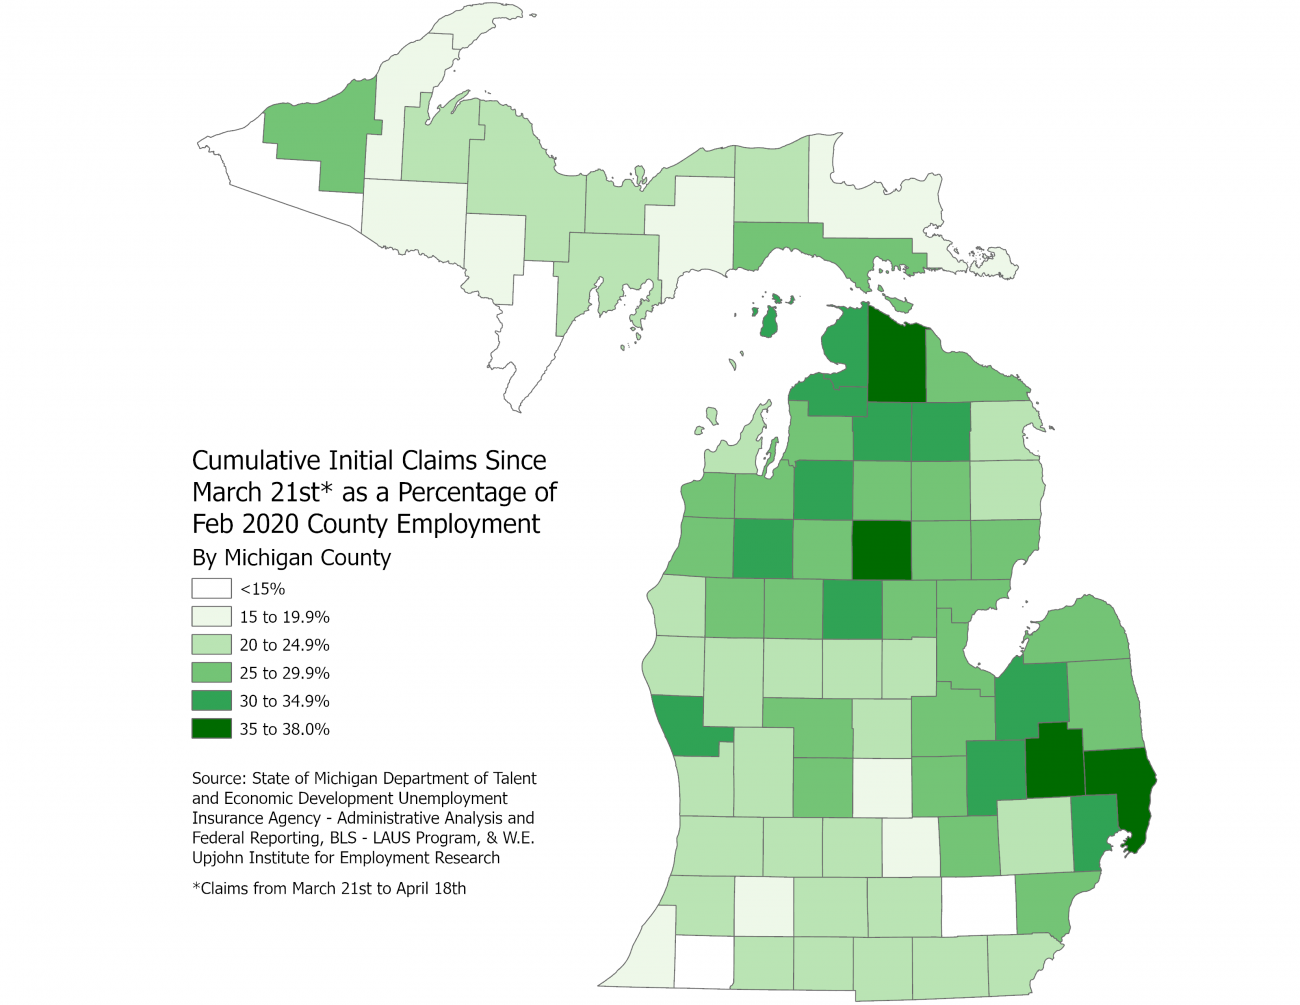 Michigan UI claims map by county